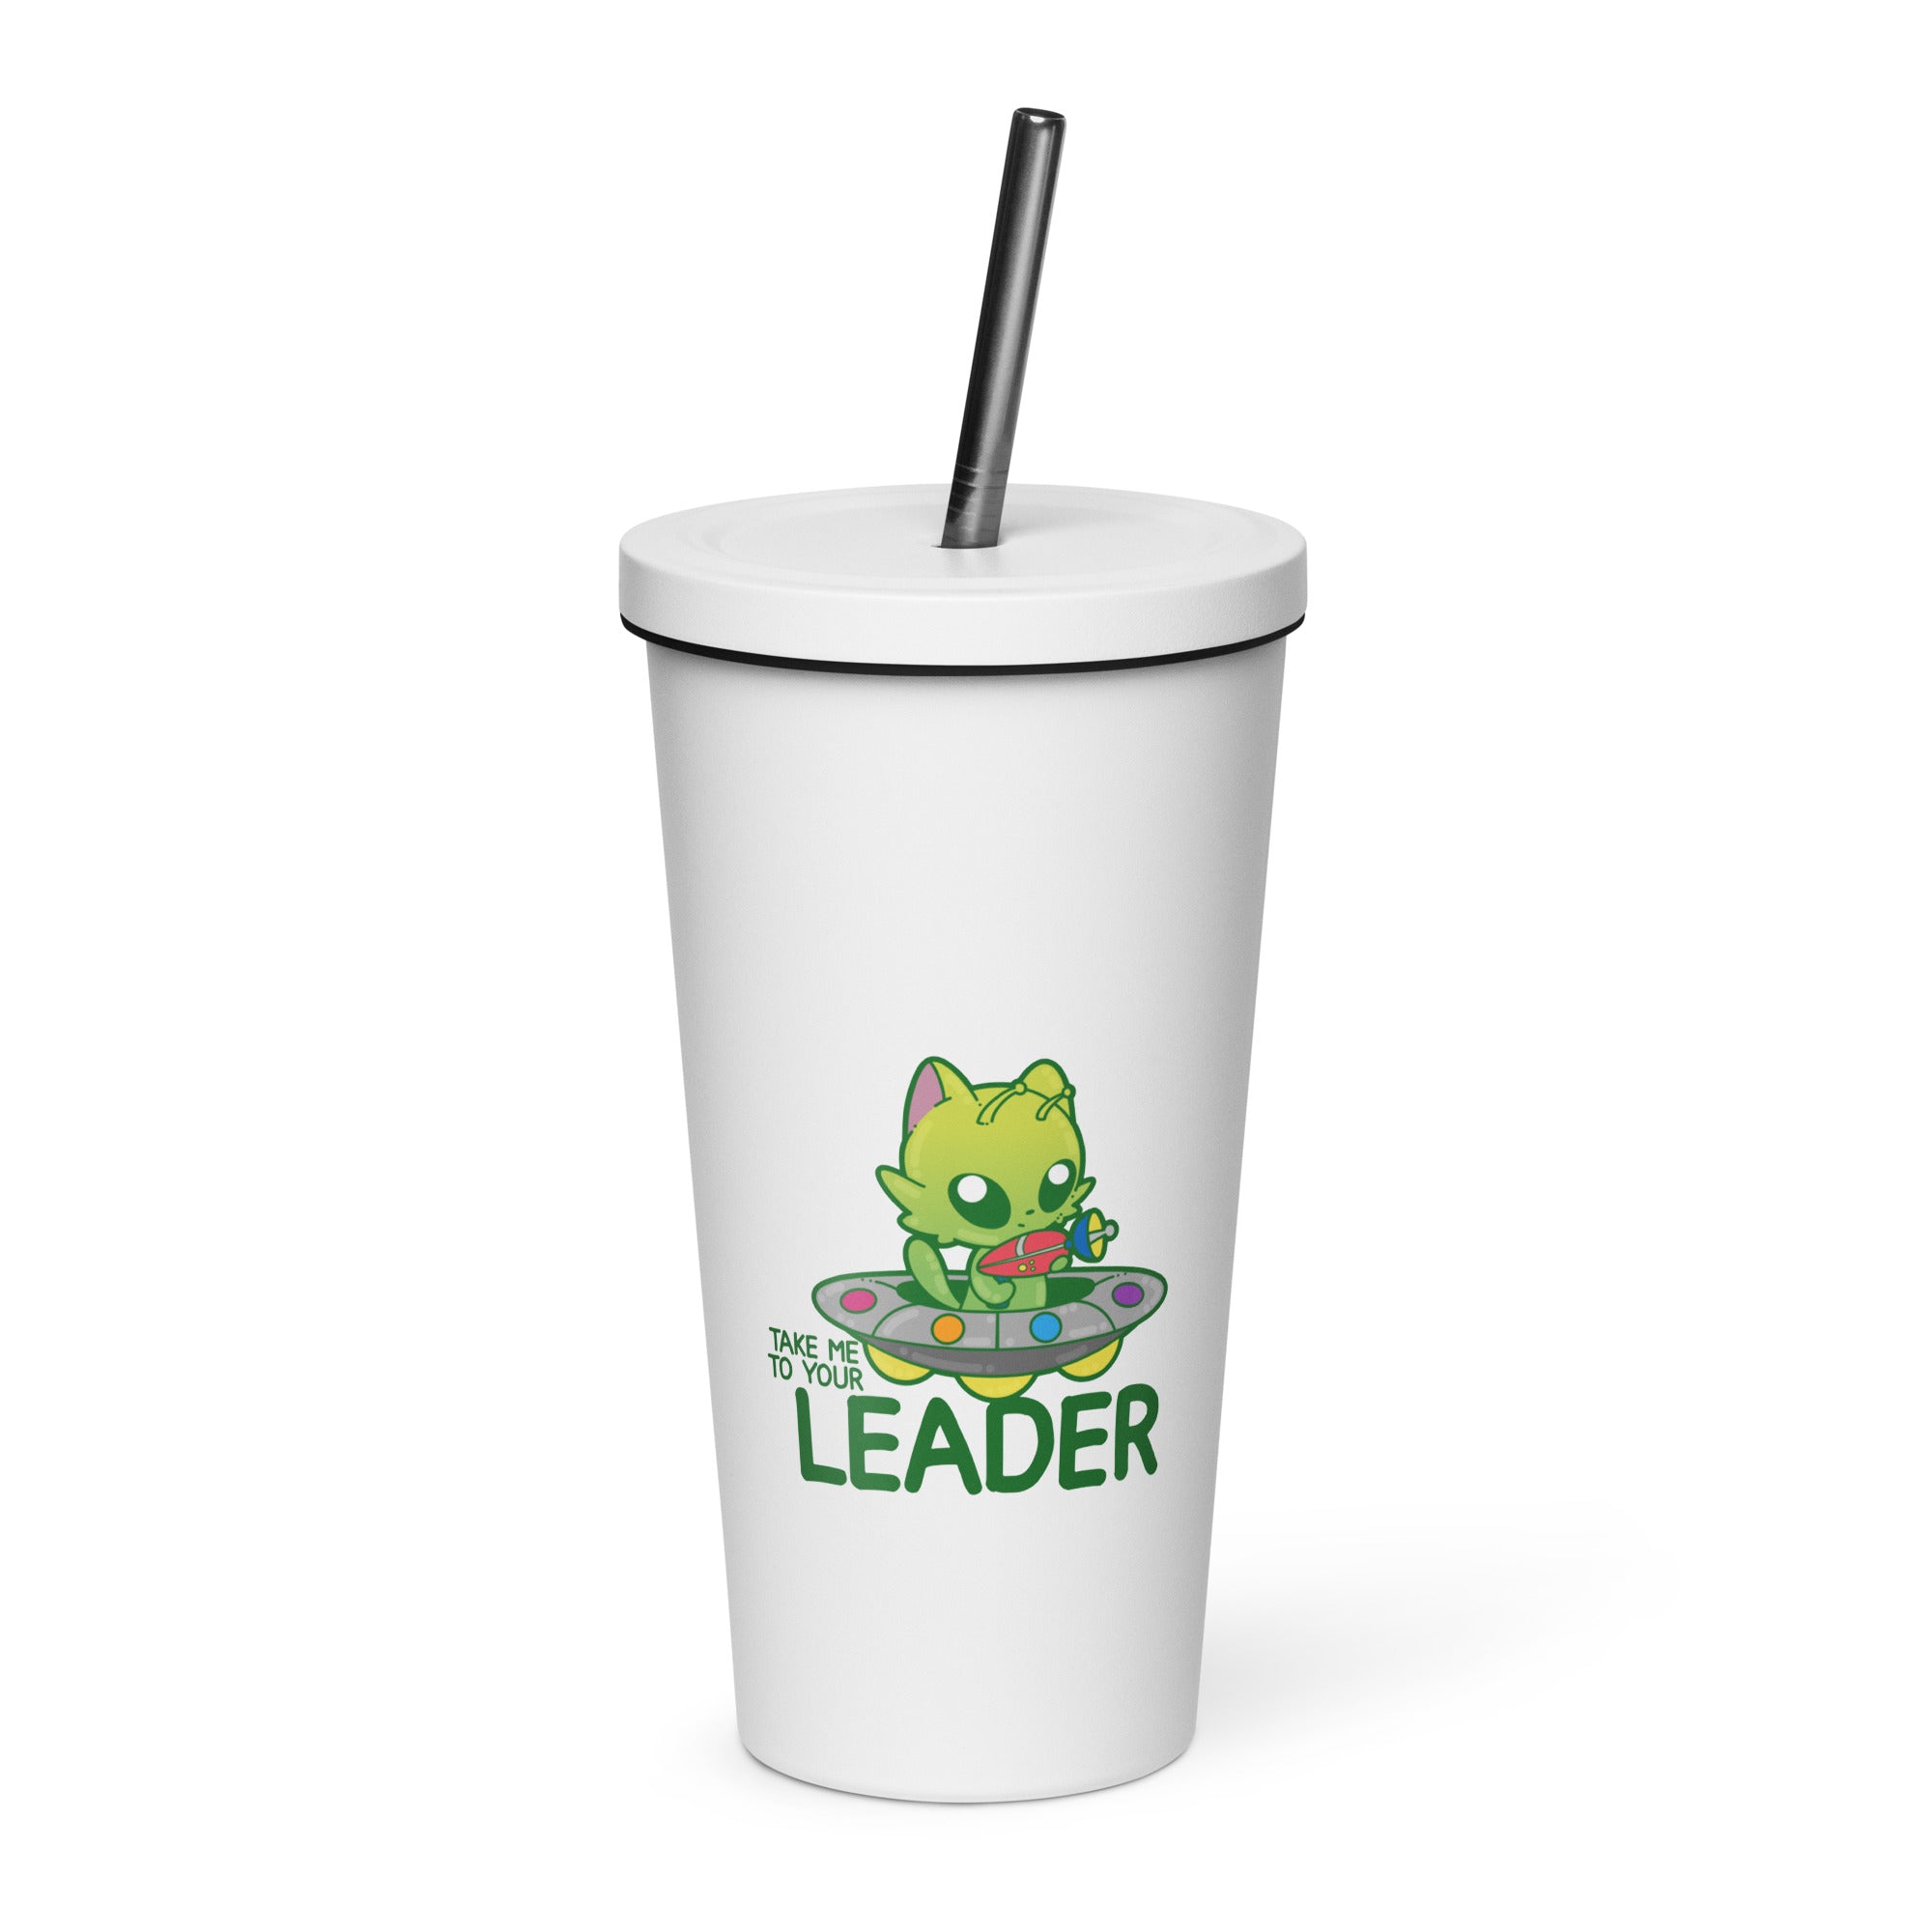 TAKE ME TO YOUR LEADER - Insulated Tumbler - ChubbleGumLLC